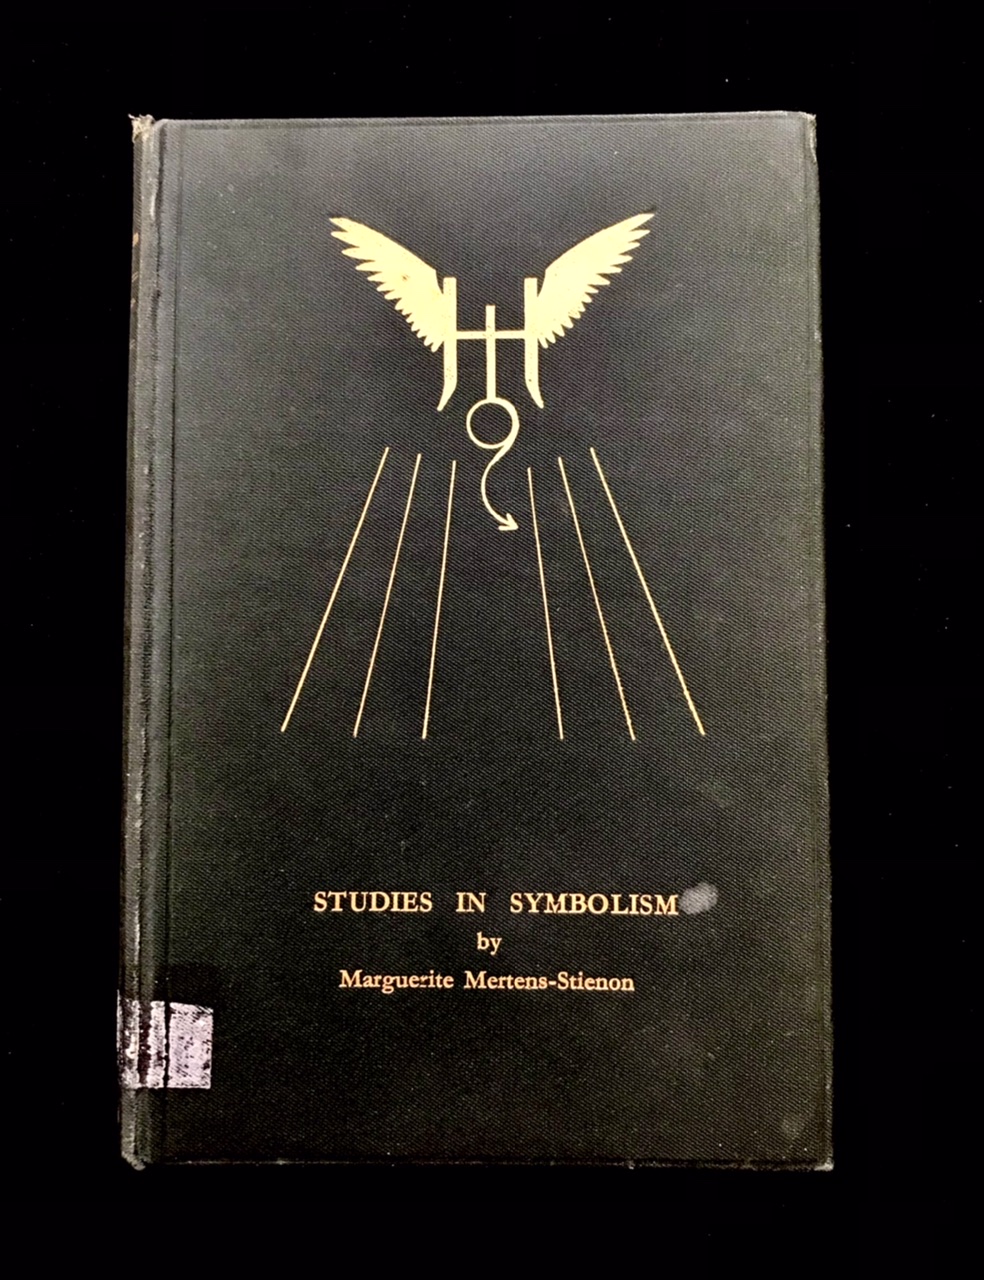 Studies In Symbolism: Theogonic and Astronomical by Marguerite Mertens- Stienon